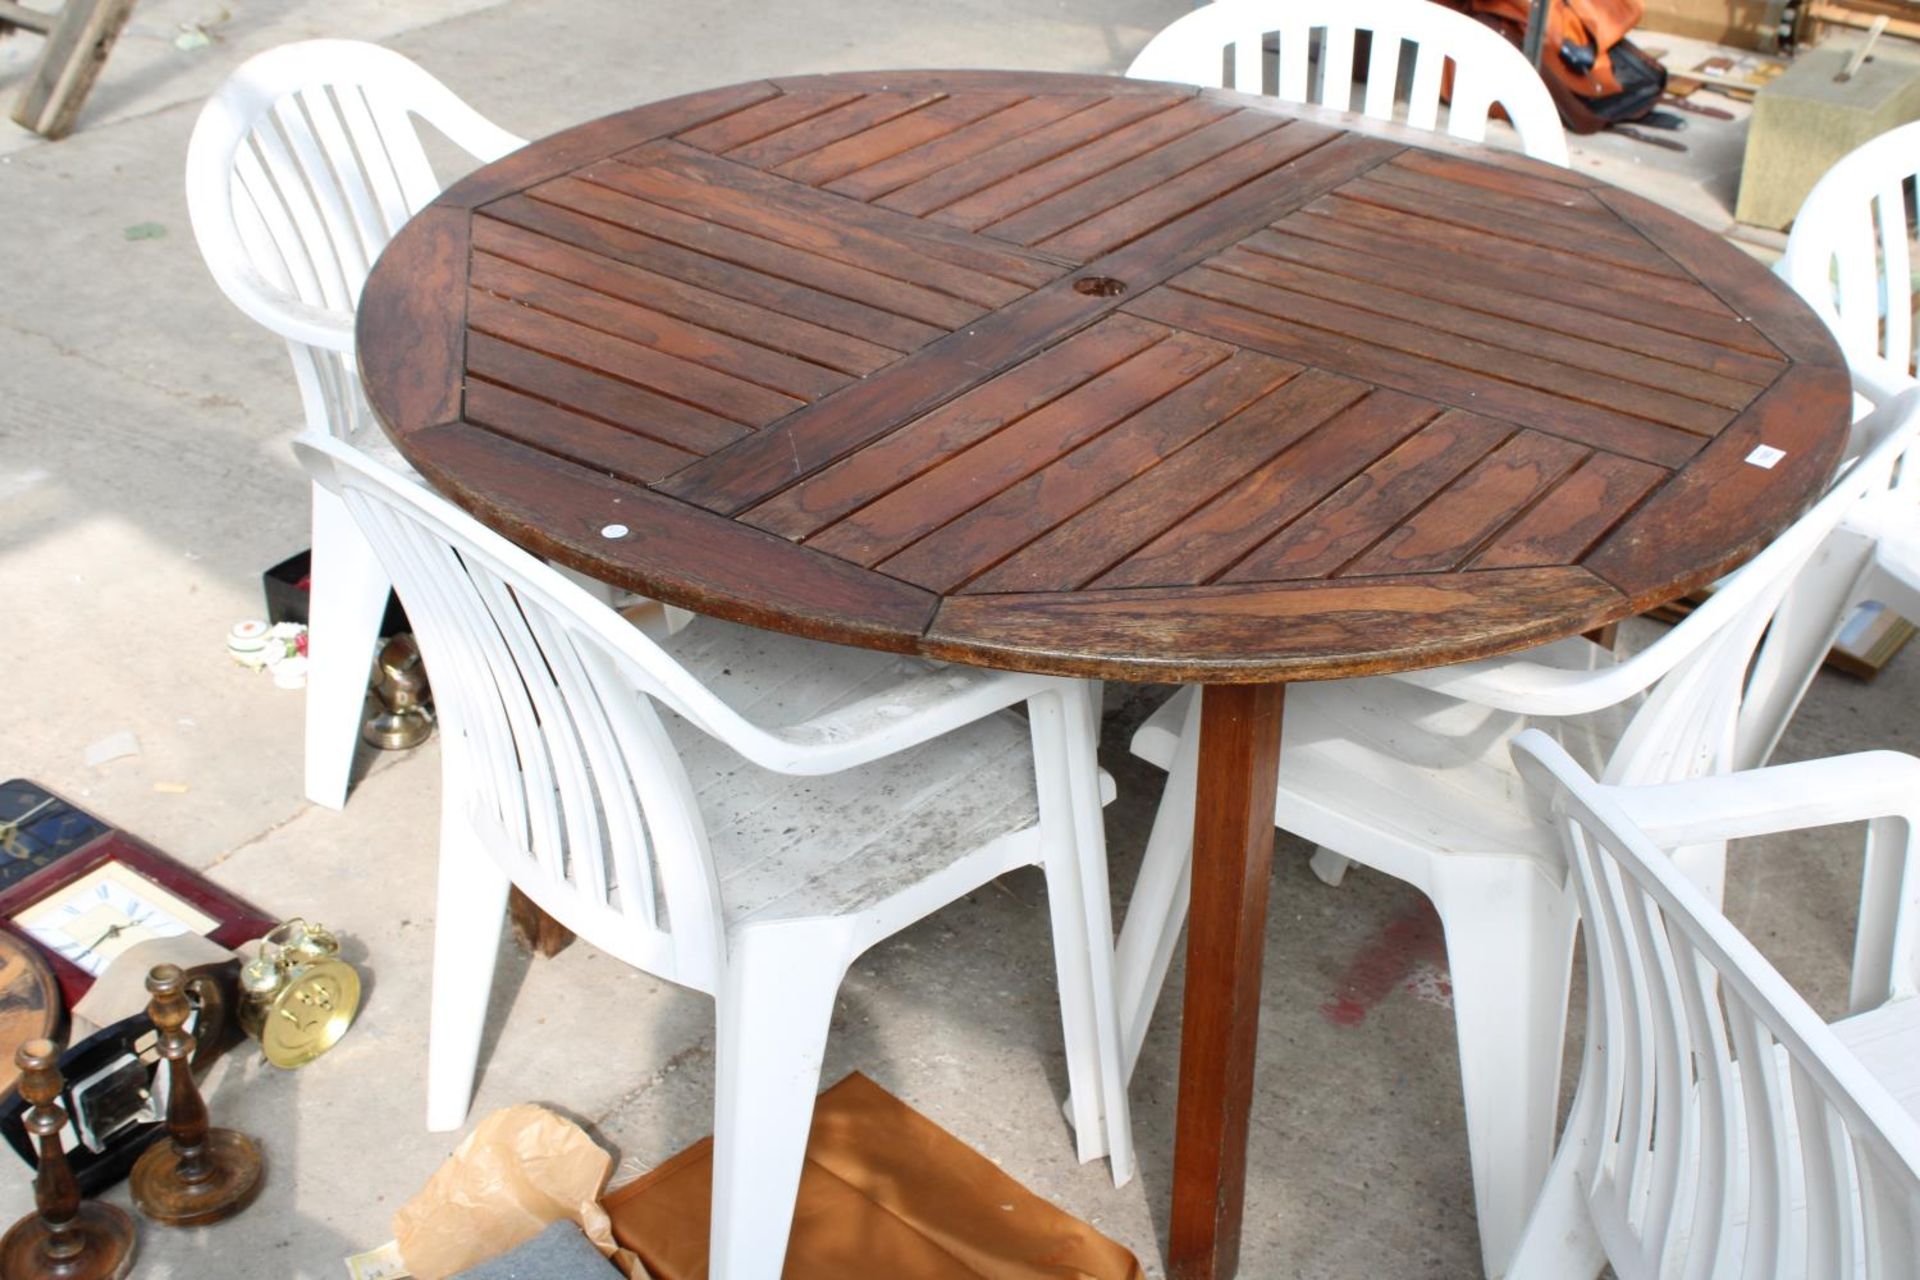 A TEAK GARDEN TABLE WITH SIX PLASTIC STACKING CHAIRS - Image 3 of 3